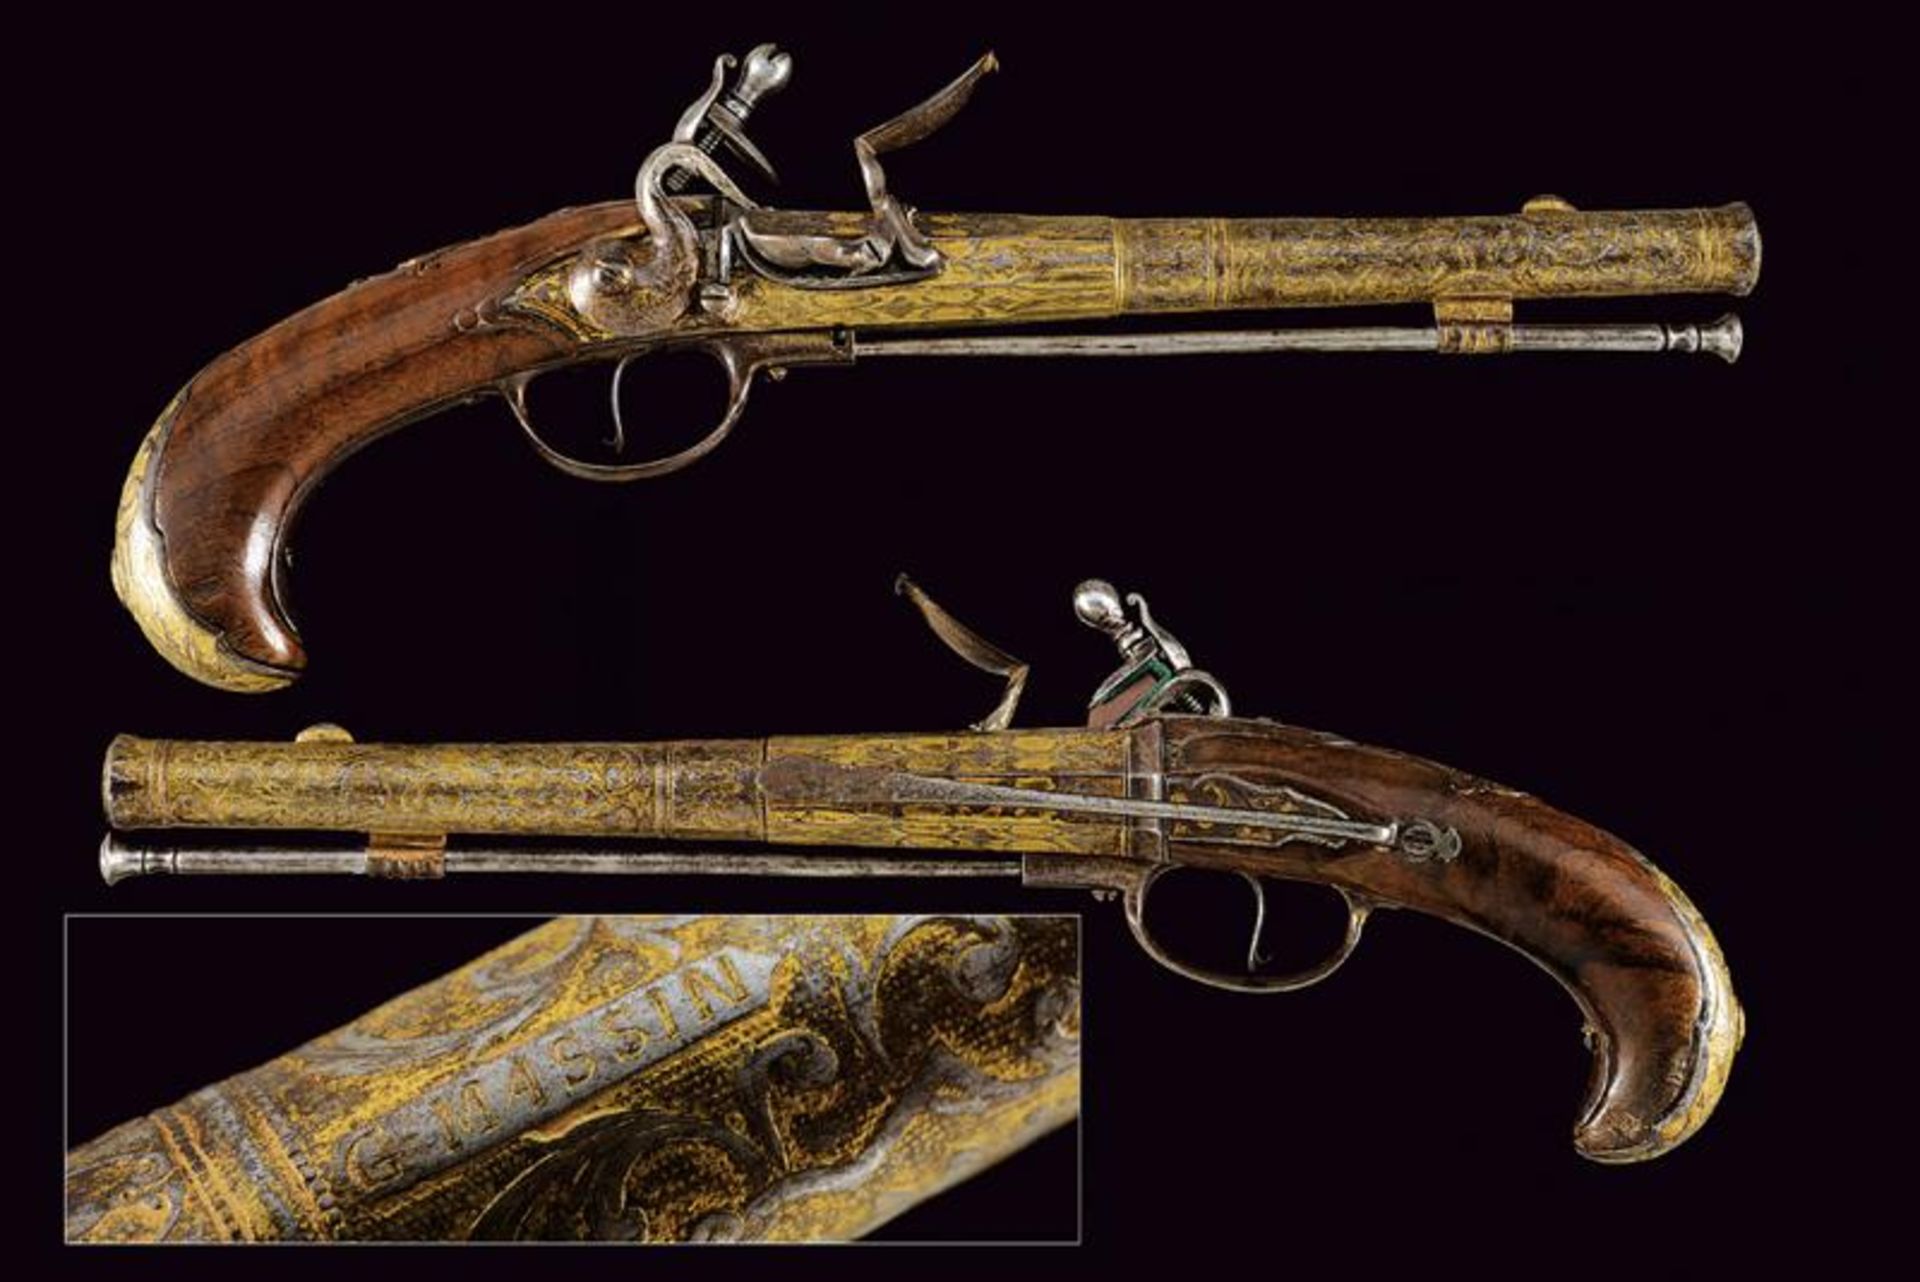 A rare engraved and gilded pair of Queen Anne flintlock pistols by G. Massin